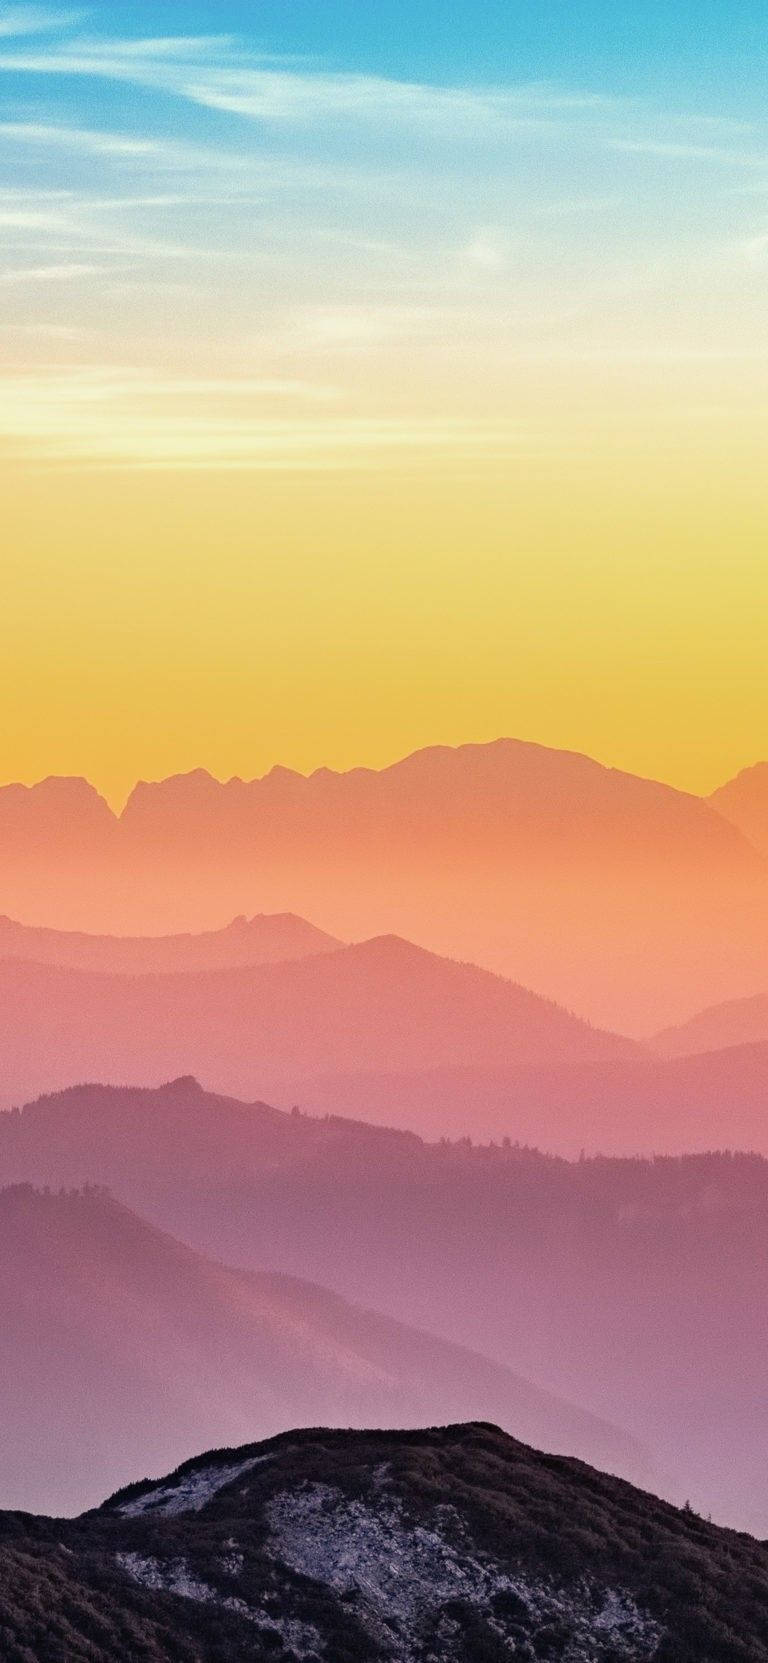 A Colorful Sunset Over The Mountains